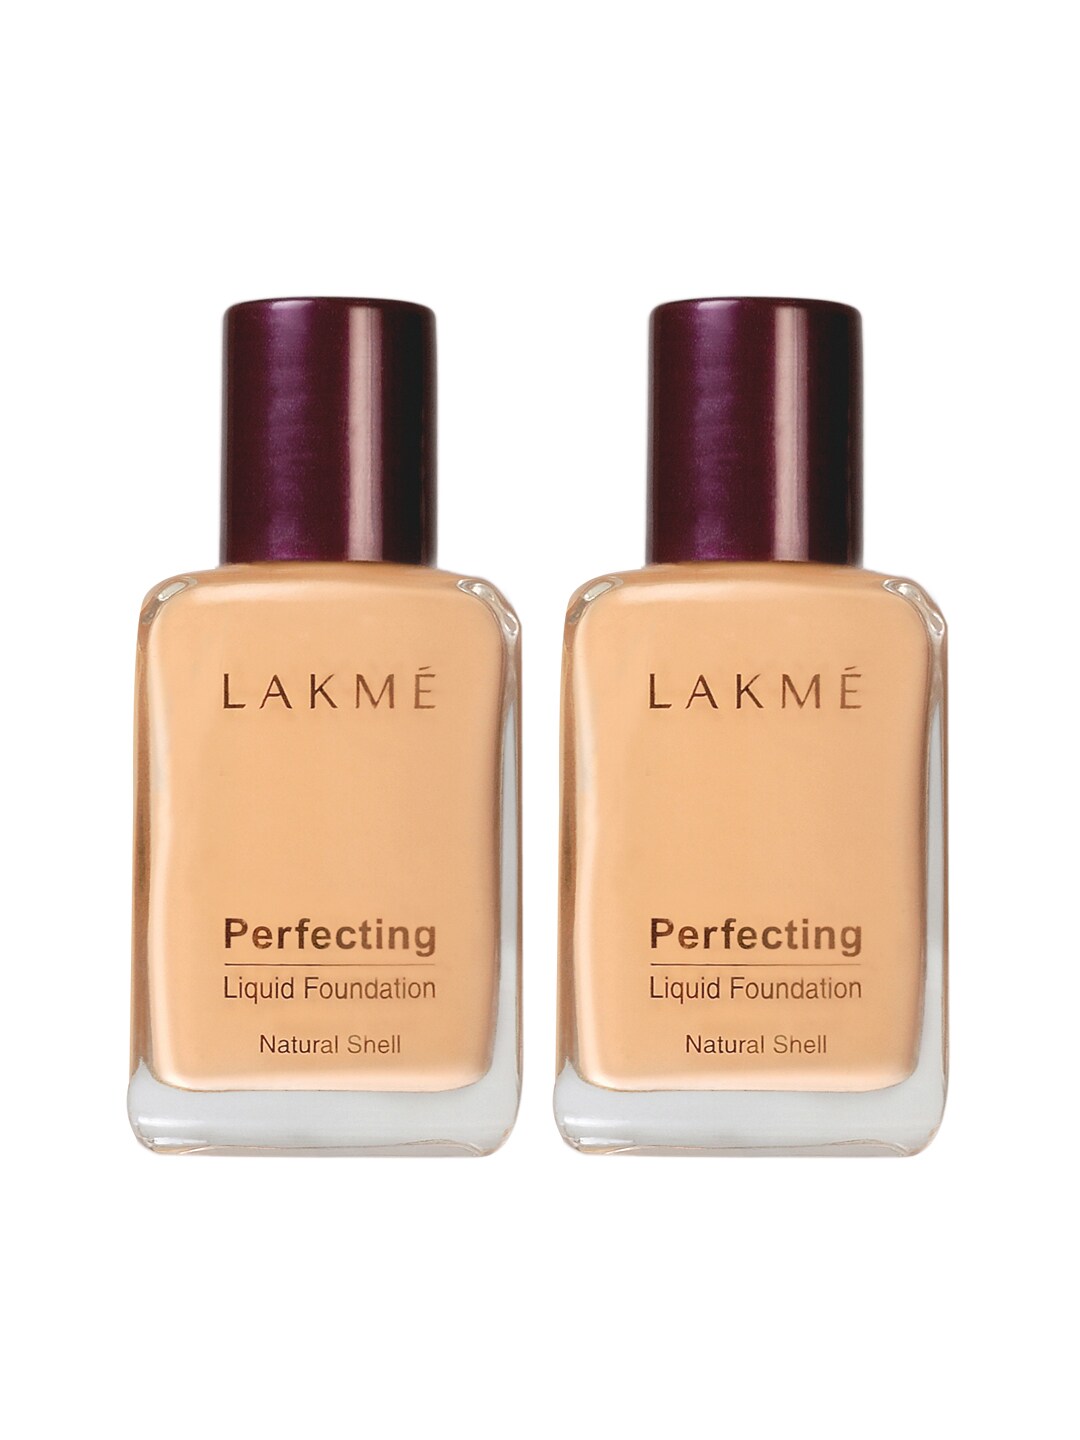 Lakme Set of 2 Perfecting Natural Pearl Liquid Foundation Price in India